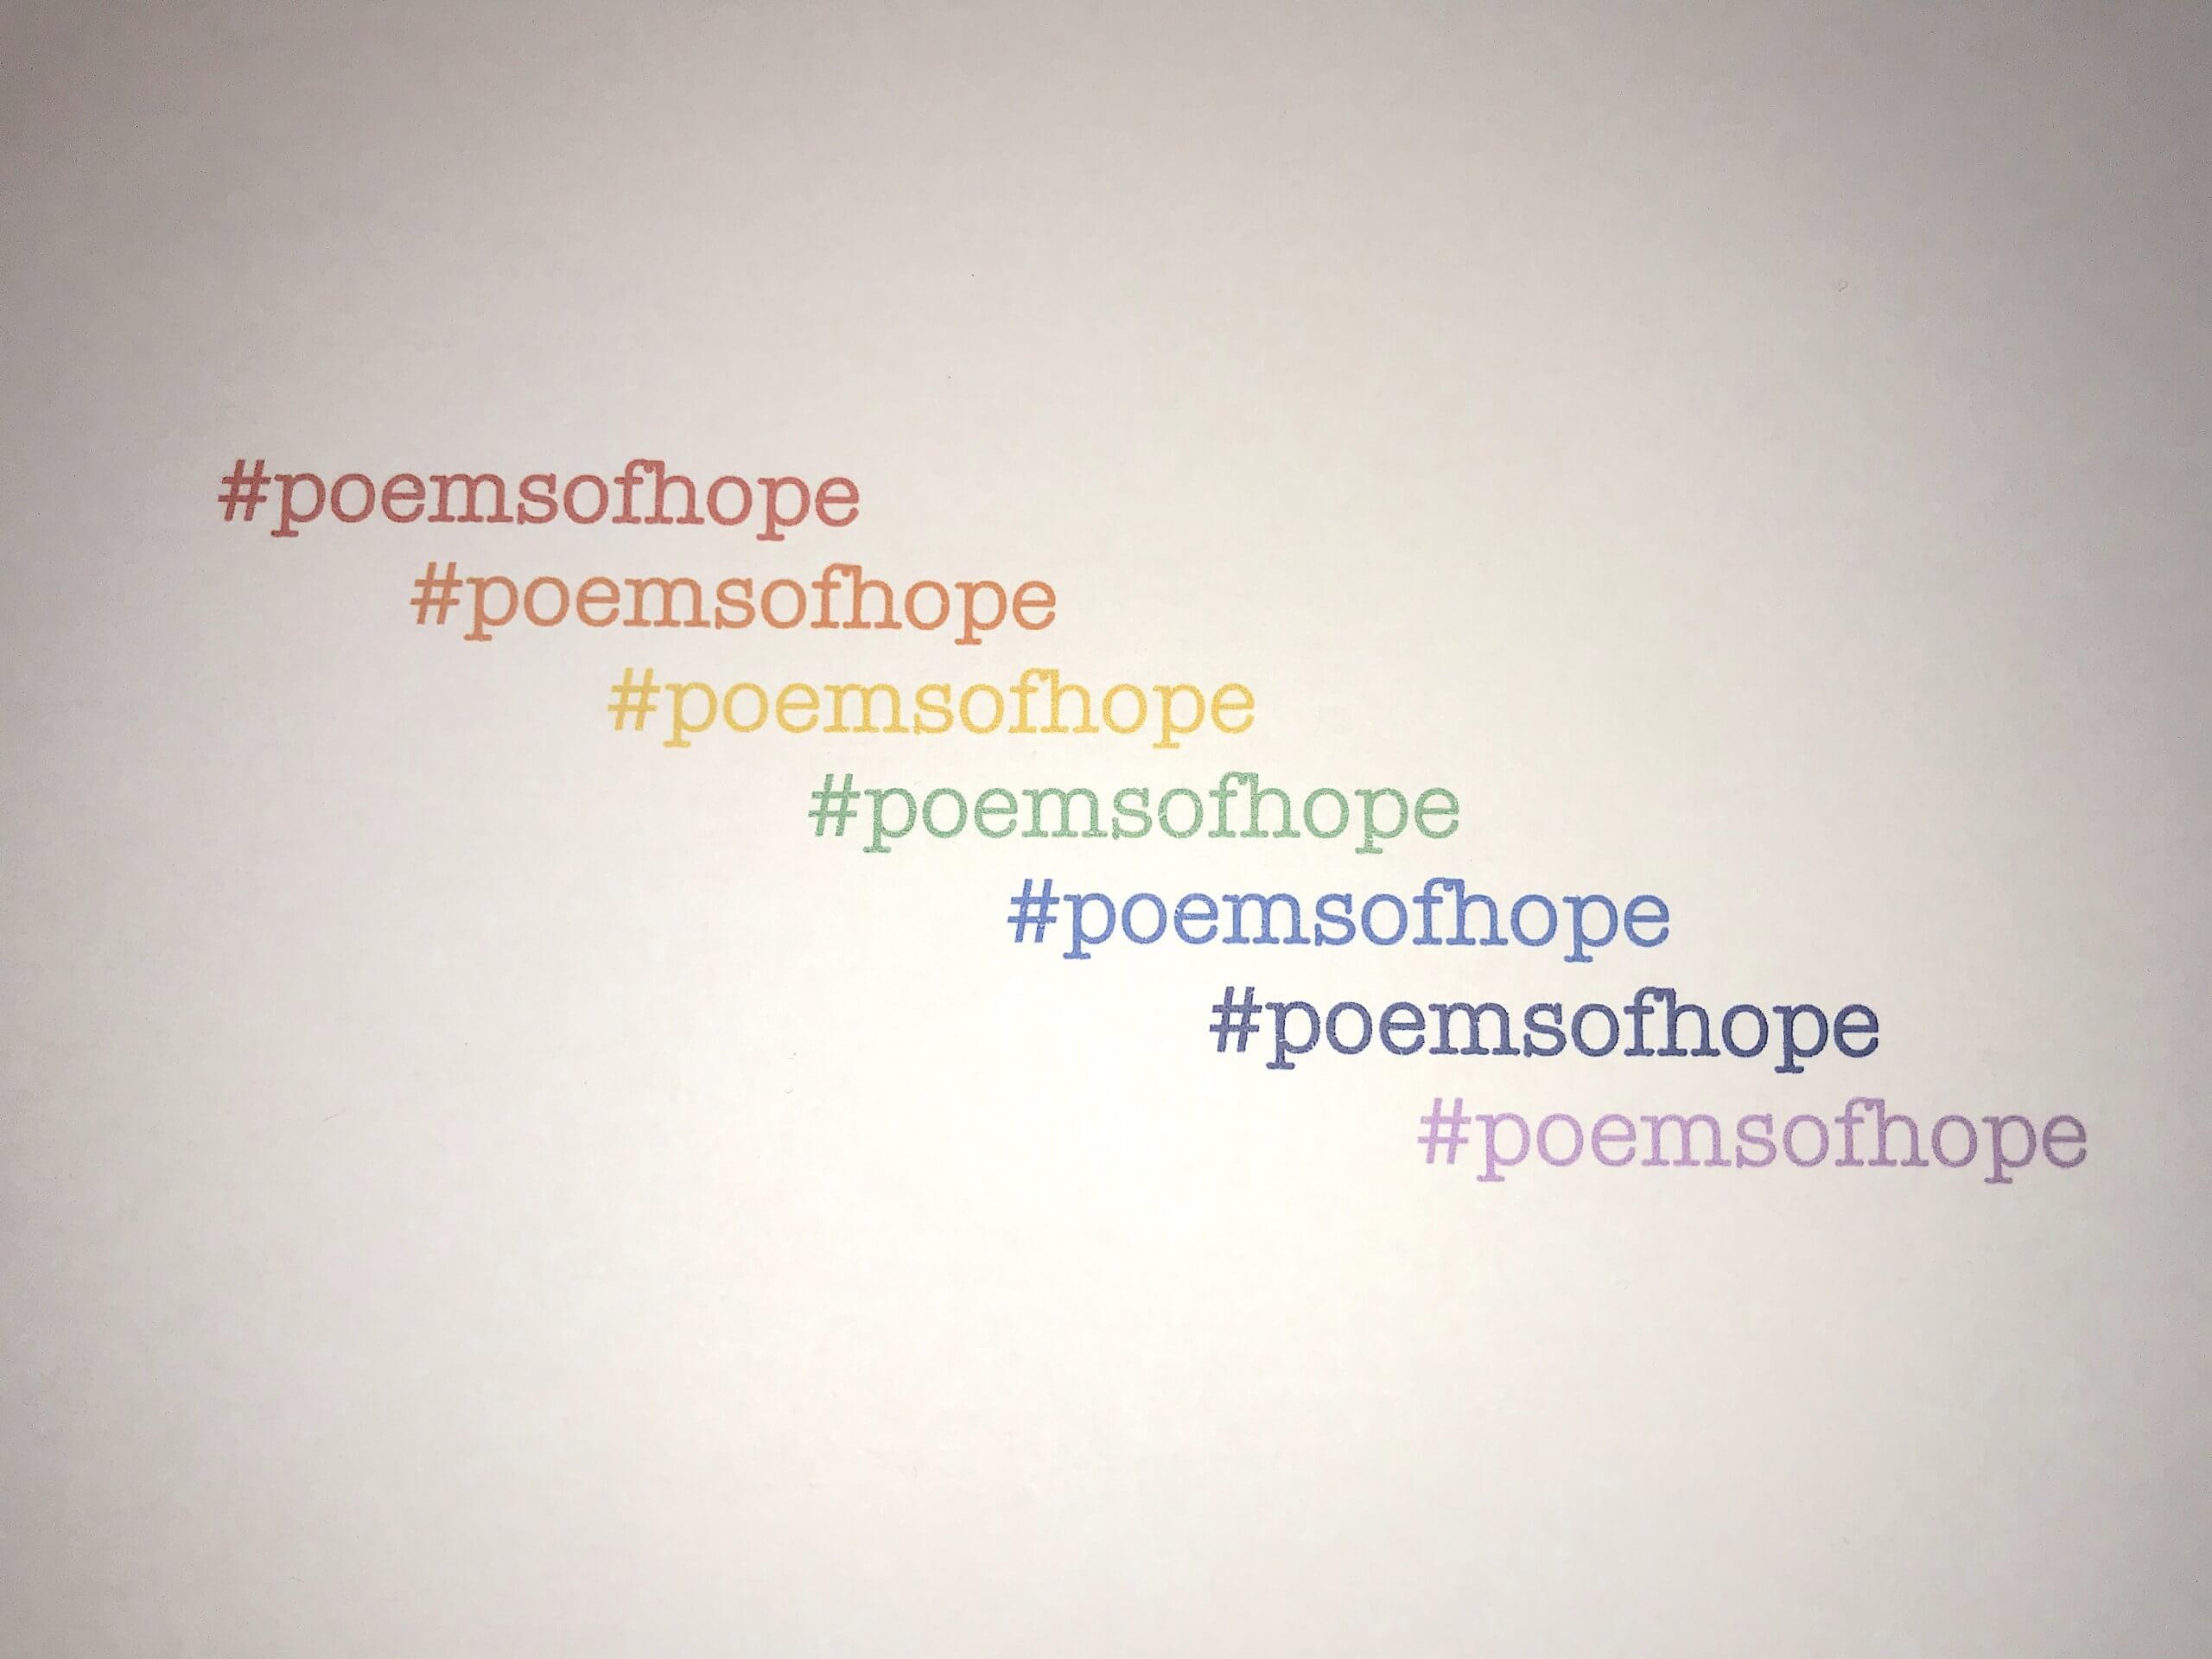 Poems of Hope